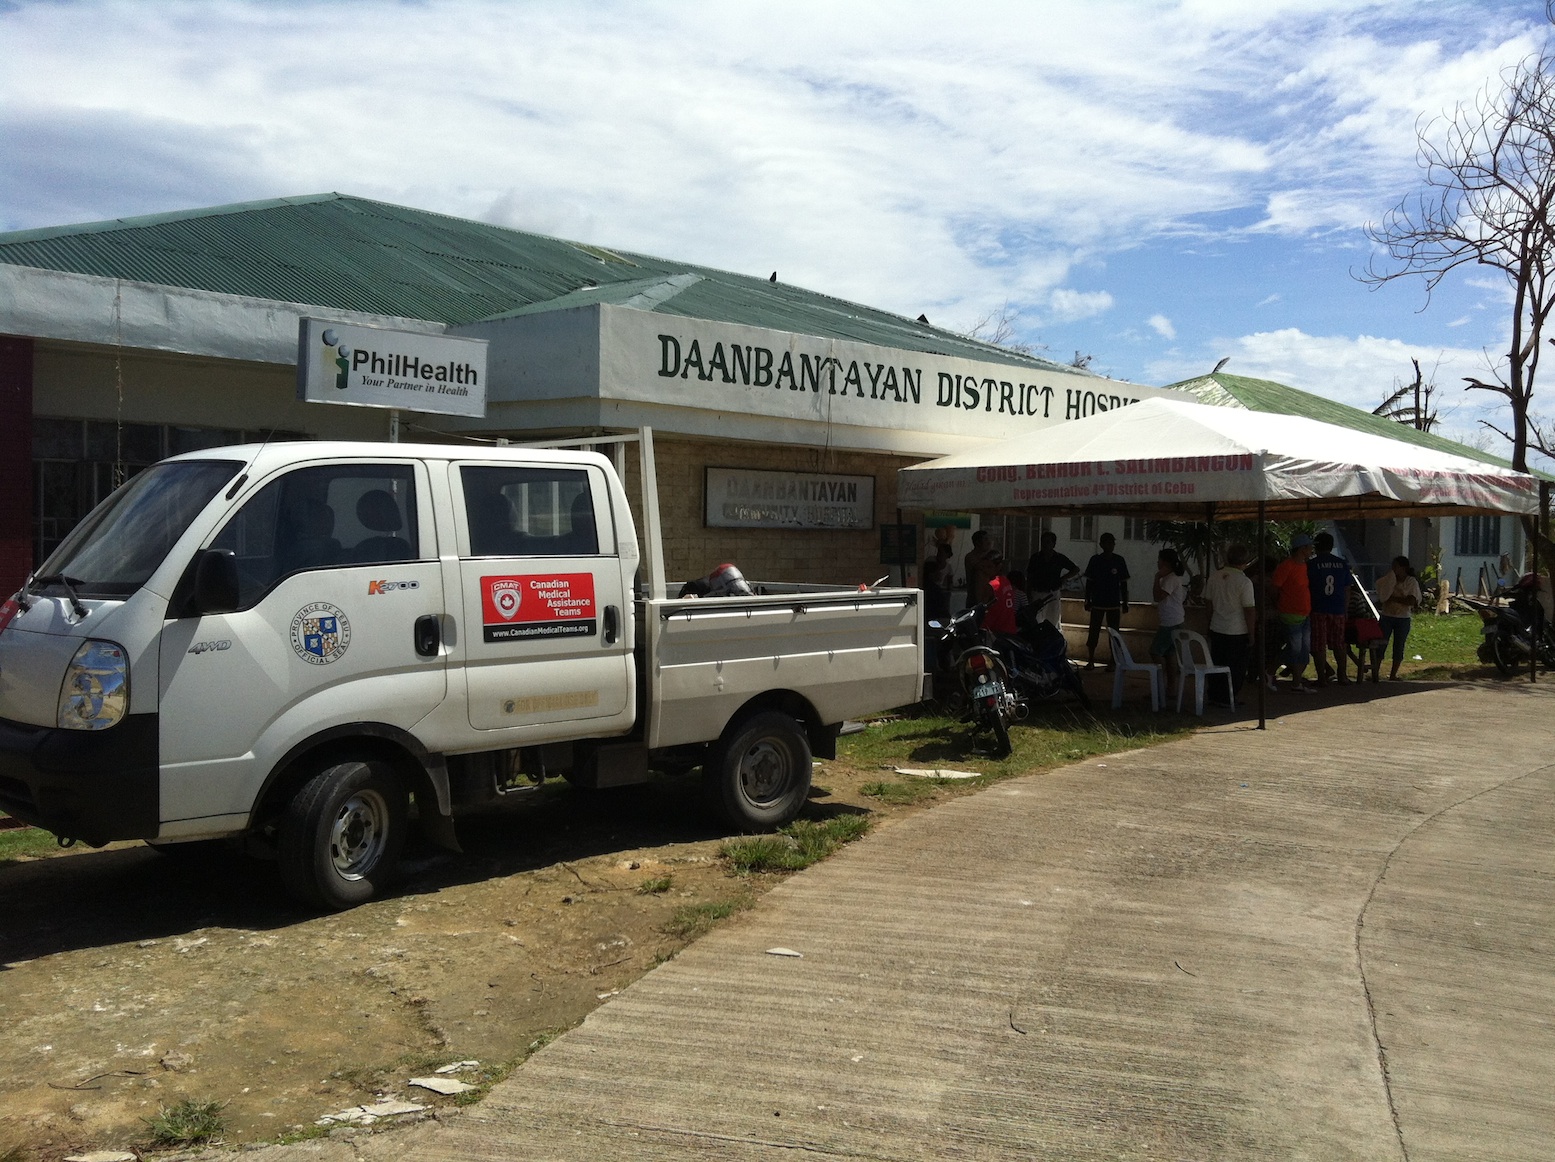 The CMAT Assessment team stops at Daanbantayan District Hospital in northern Cebu, to assess the infrastructure and damage caused by Typhoon Yolanda (Haiyan)